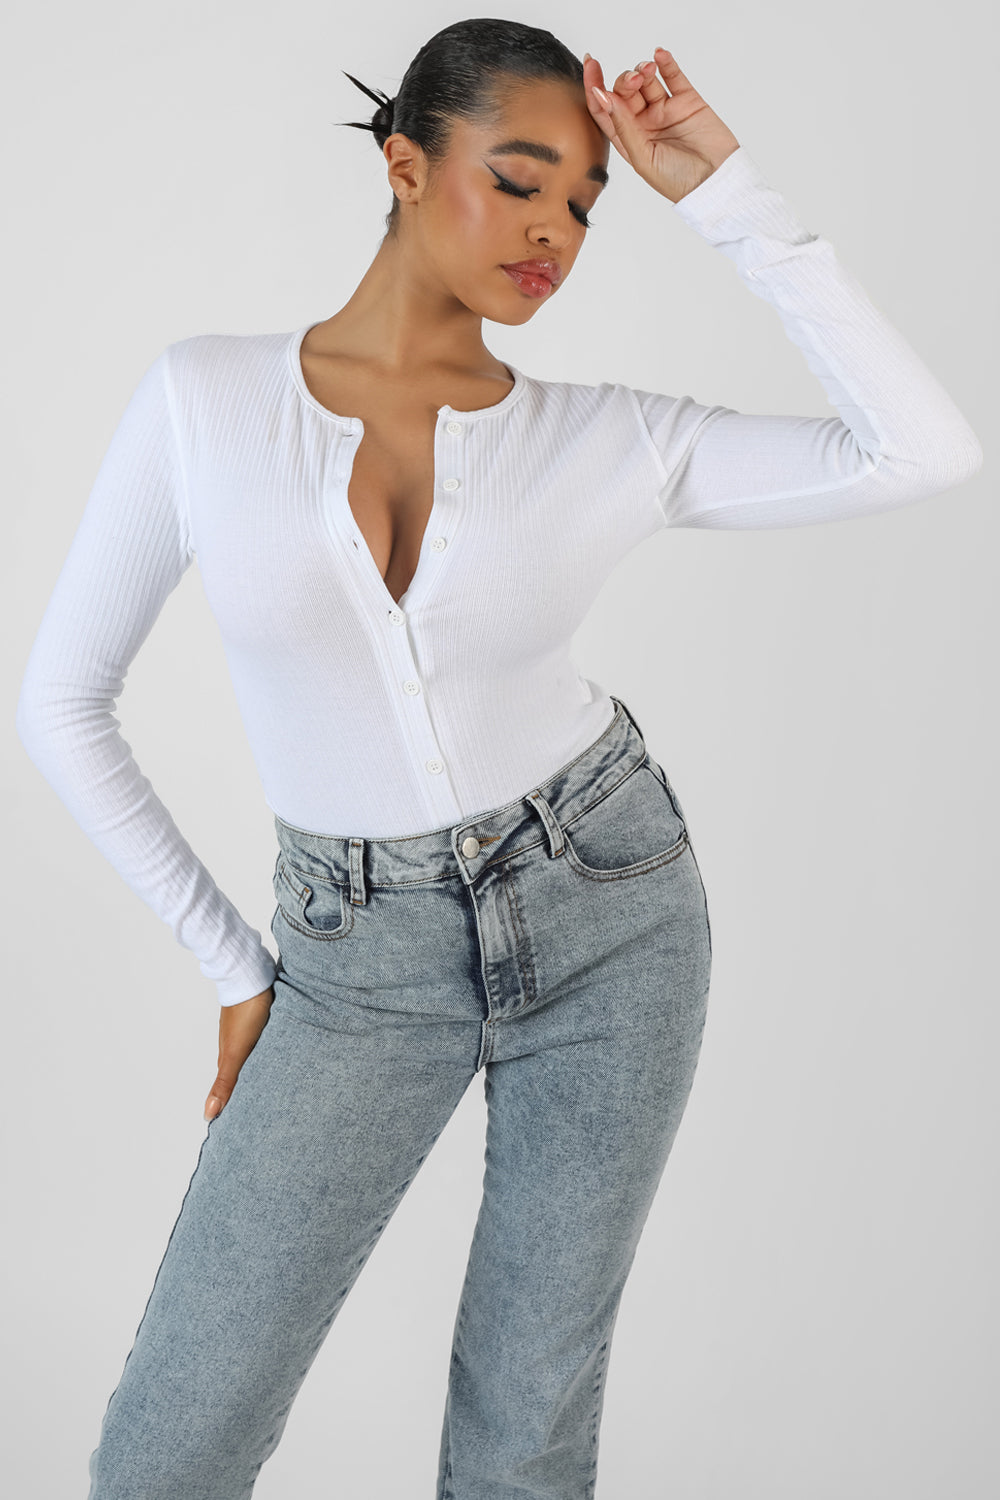 Ribbed Casual Lace Up Letter Print High Waist White Top Bodysuit Women Long  Sleeve Skinny Body Shirt Ladies Autumn Body Suits 210709